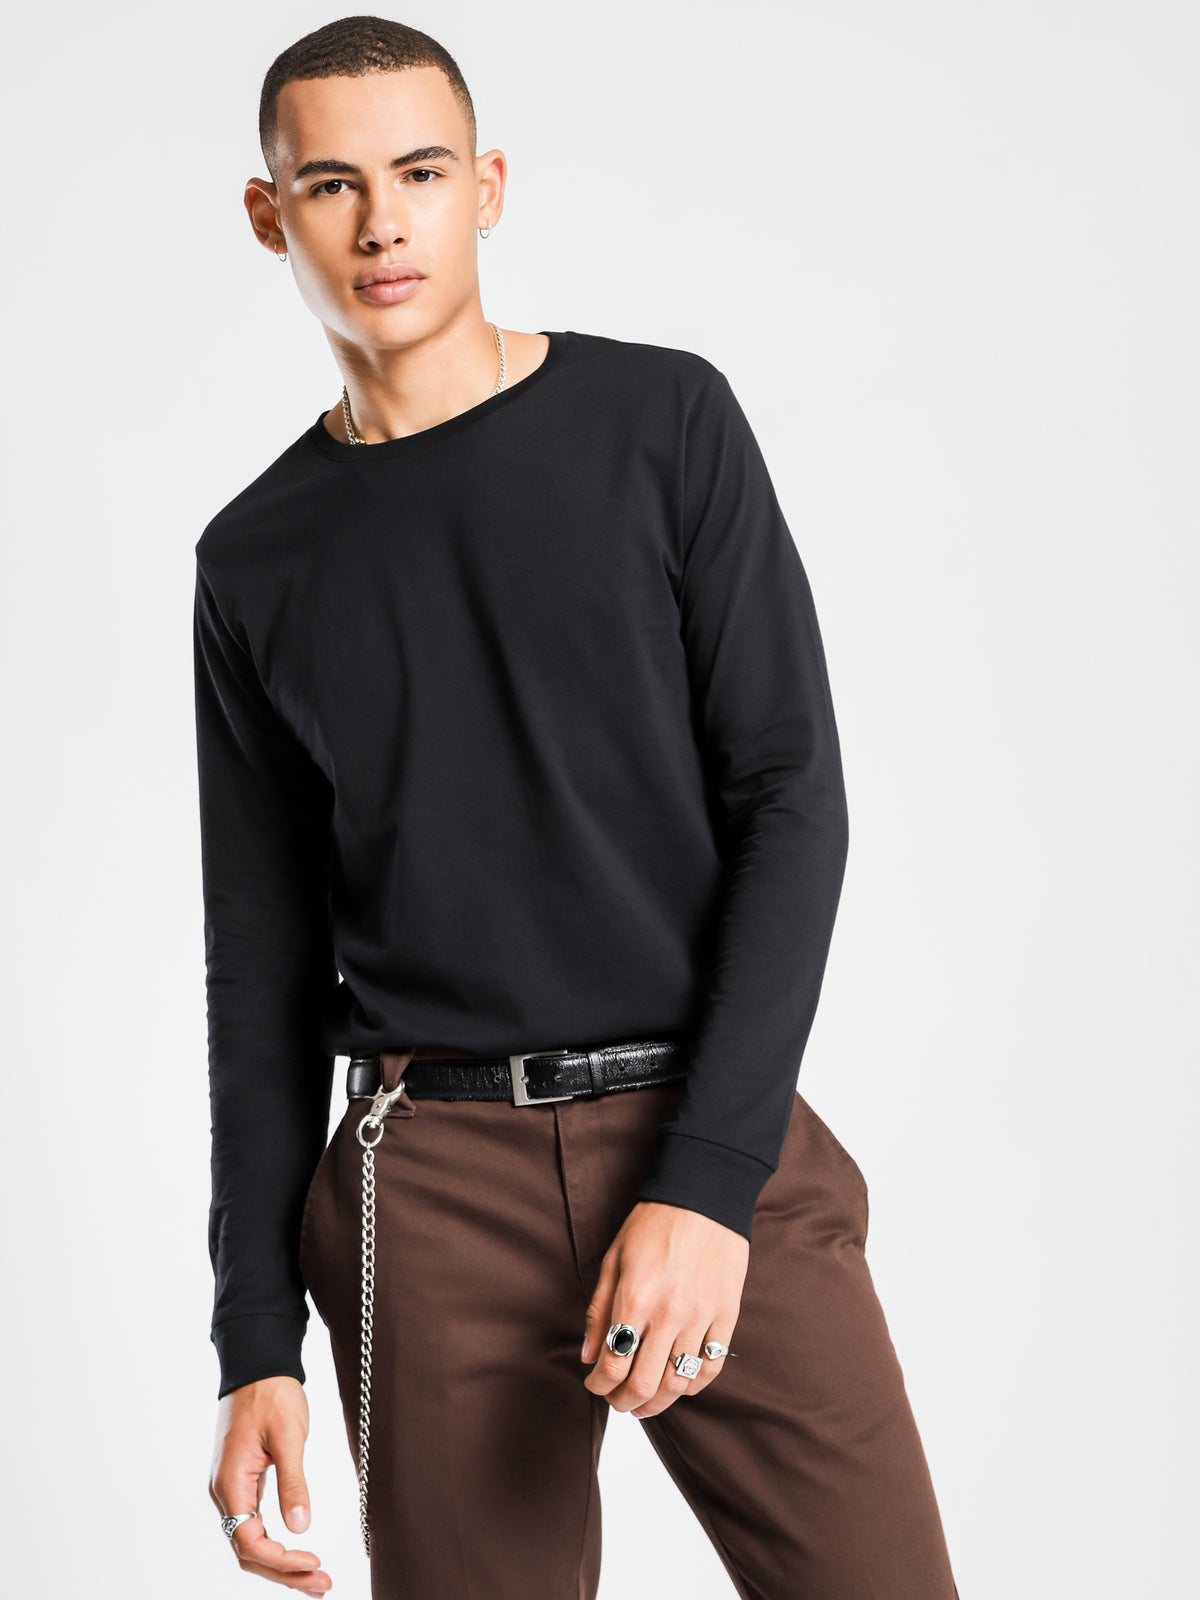 Contra Long Sleeved Shirt in Black